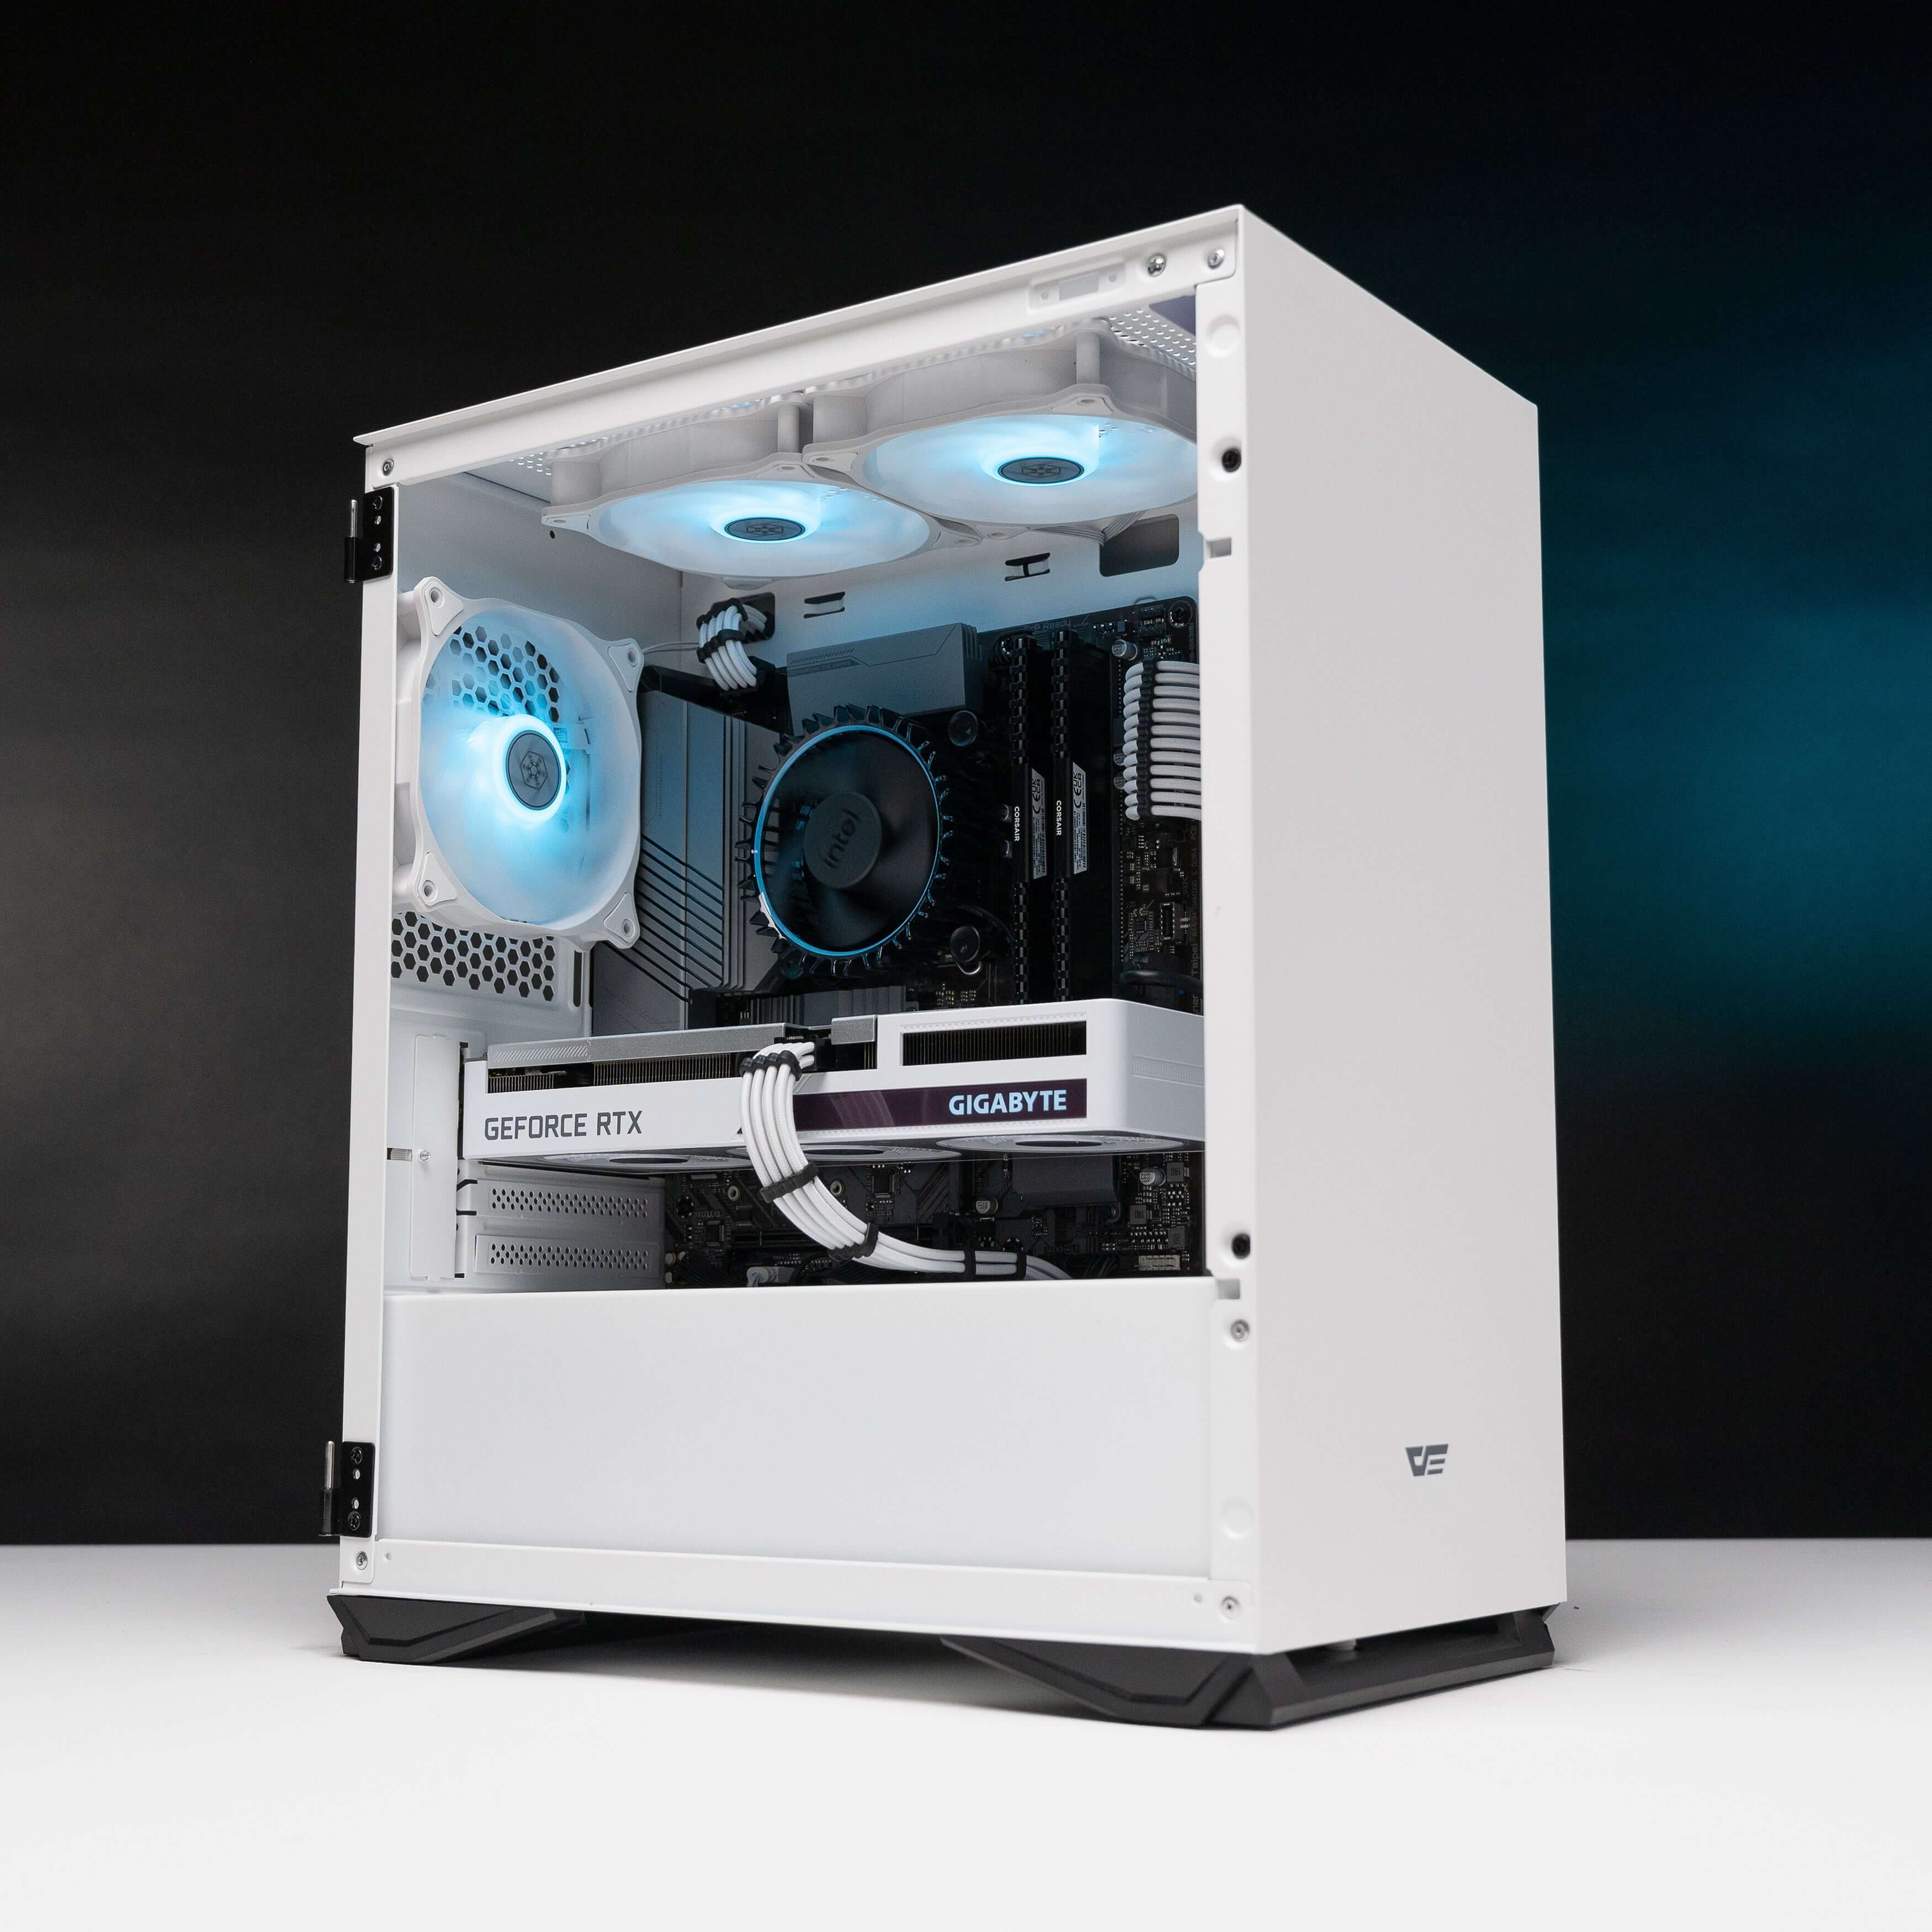 Collection of Kudan gaming PCs featuring high-end components and striking designs